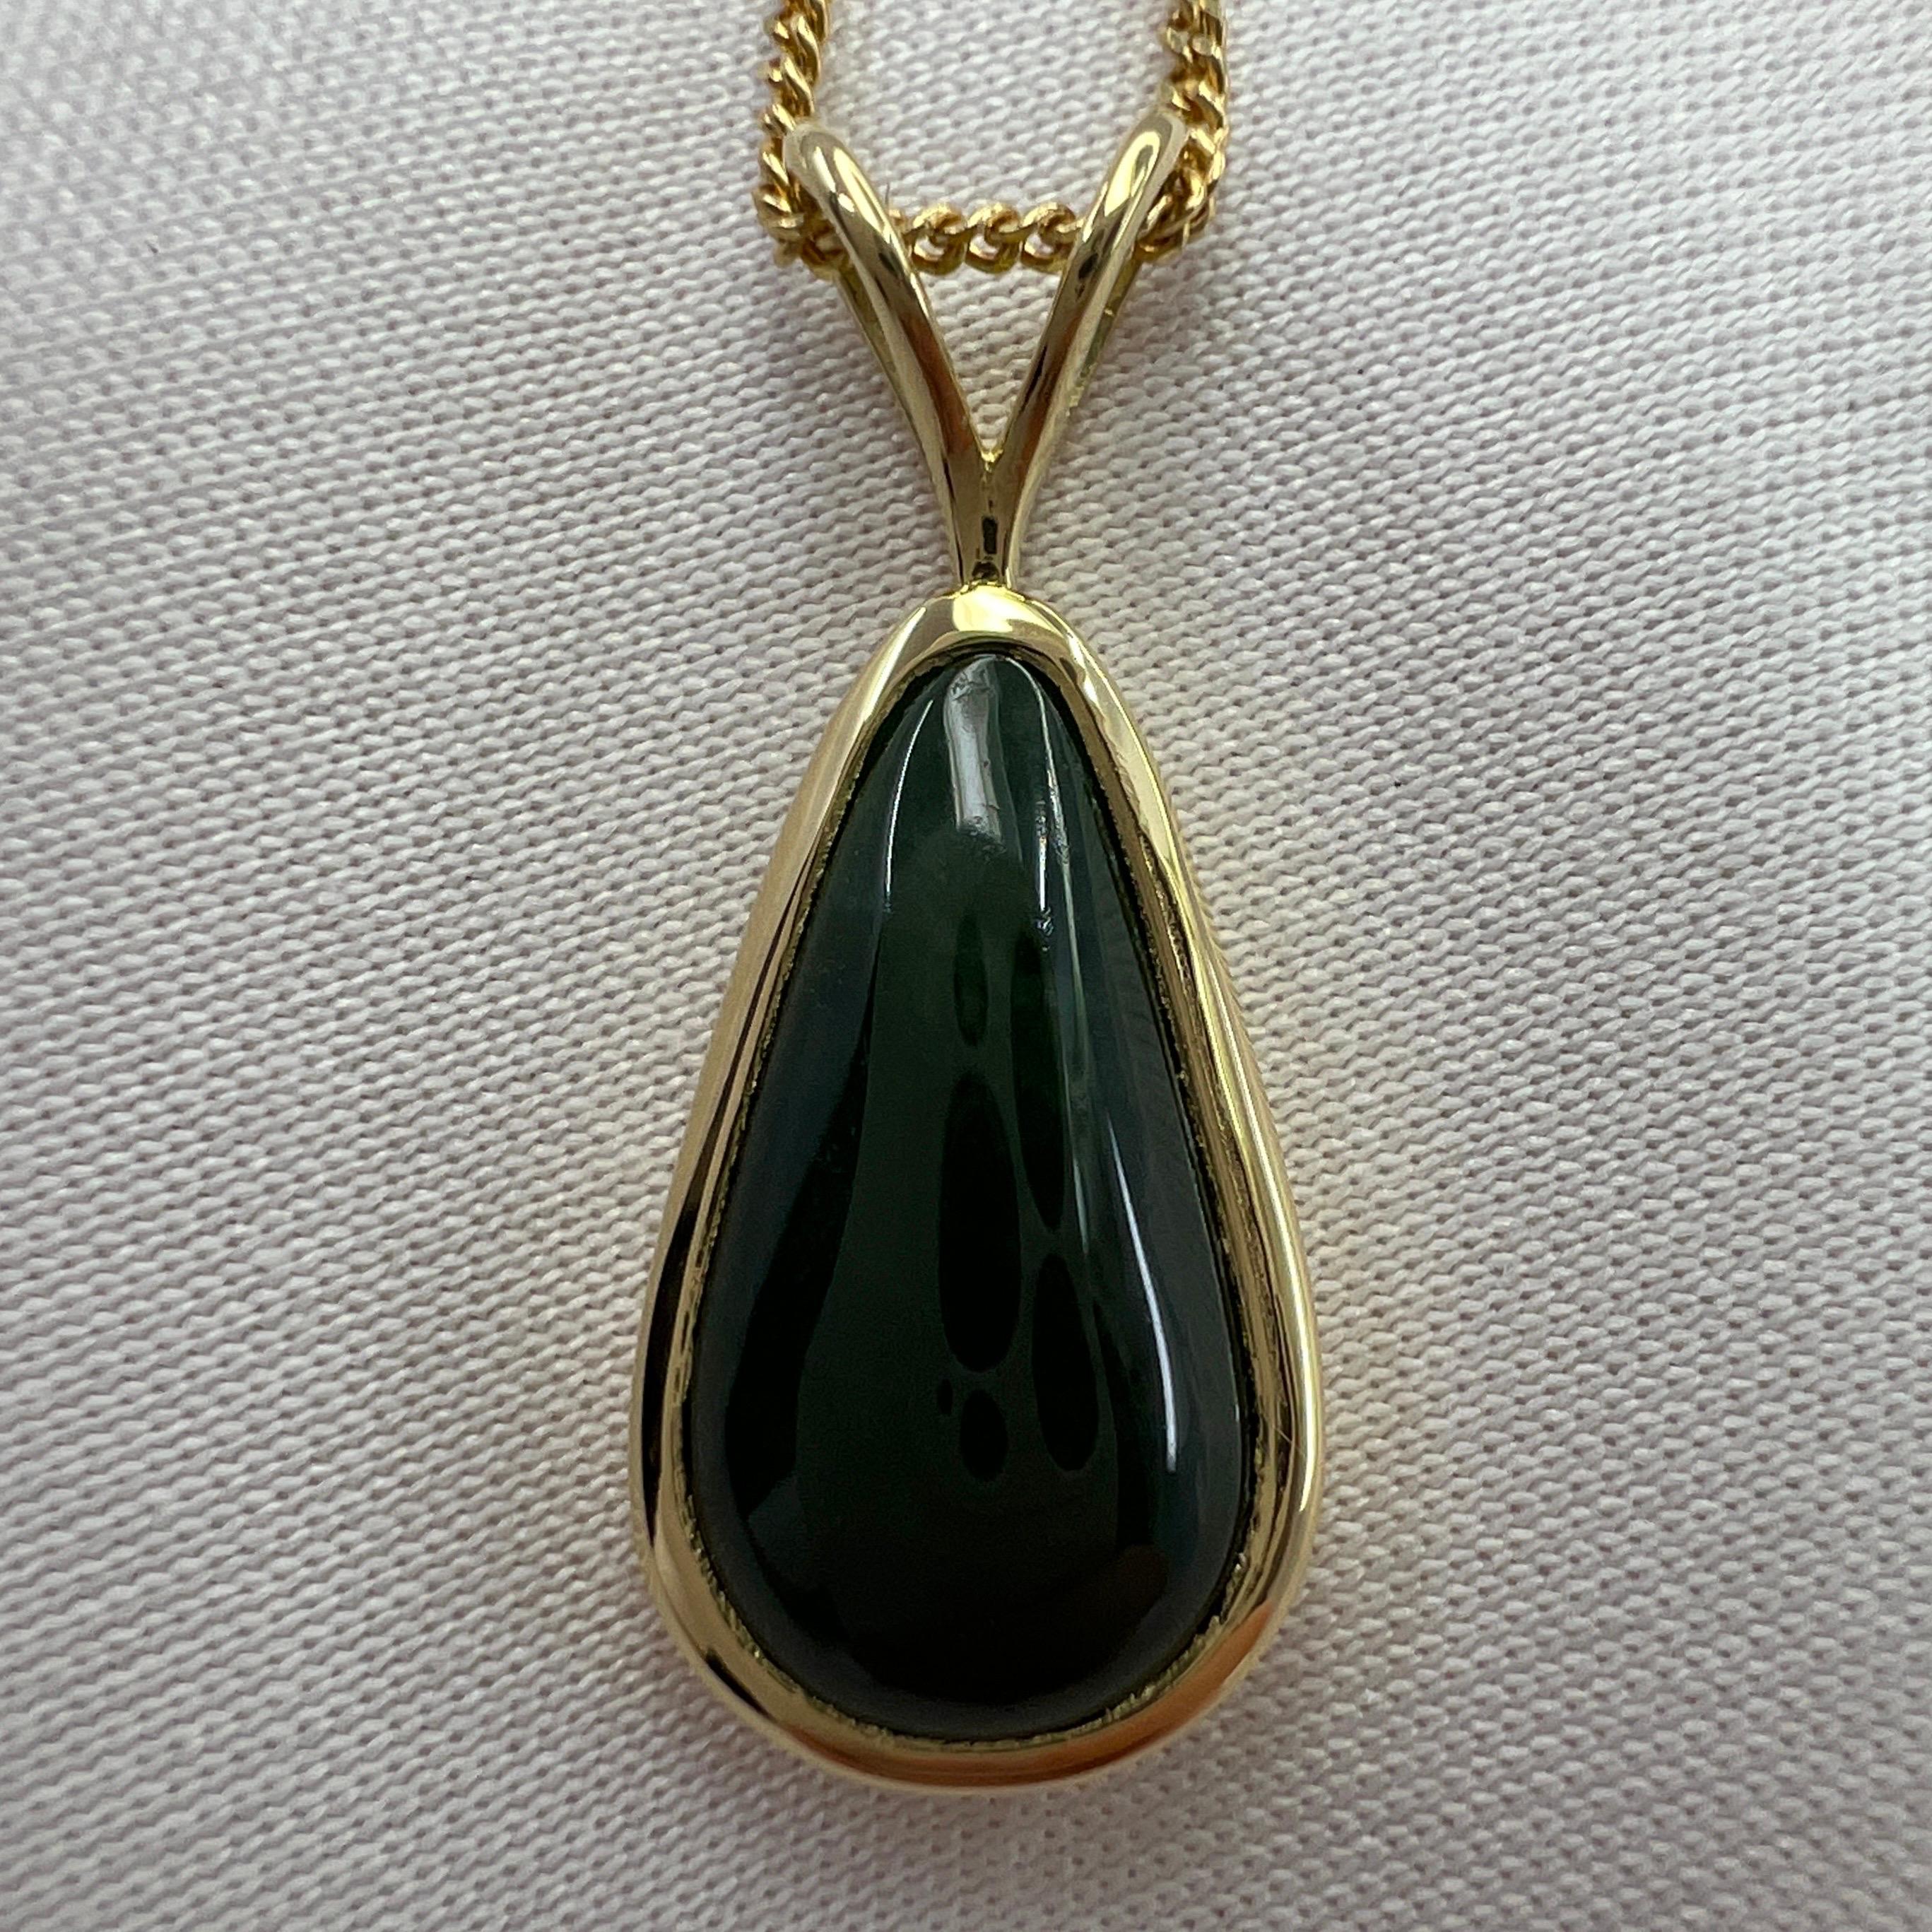 IGI Certified A-Grade Deep Green Jadeite 18k Gold Pendant Necklace.

Stunning 2.76 carat untreated deep green jadeite jade set in a fine 18k yellow gold solitaire pendant.

Has an excellent pear cabochon cut showing the colour beautifully. Fine deep